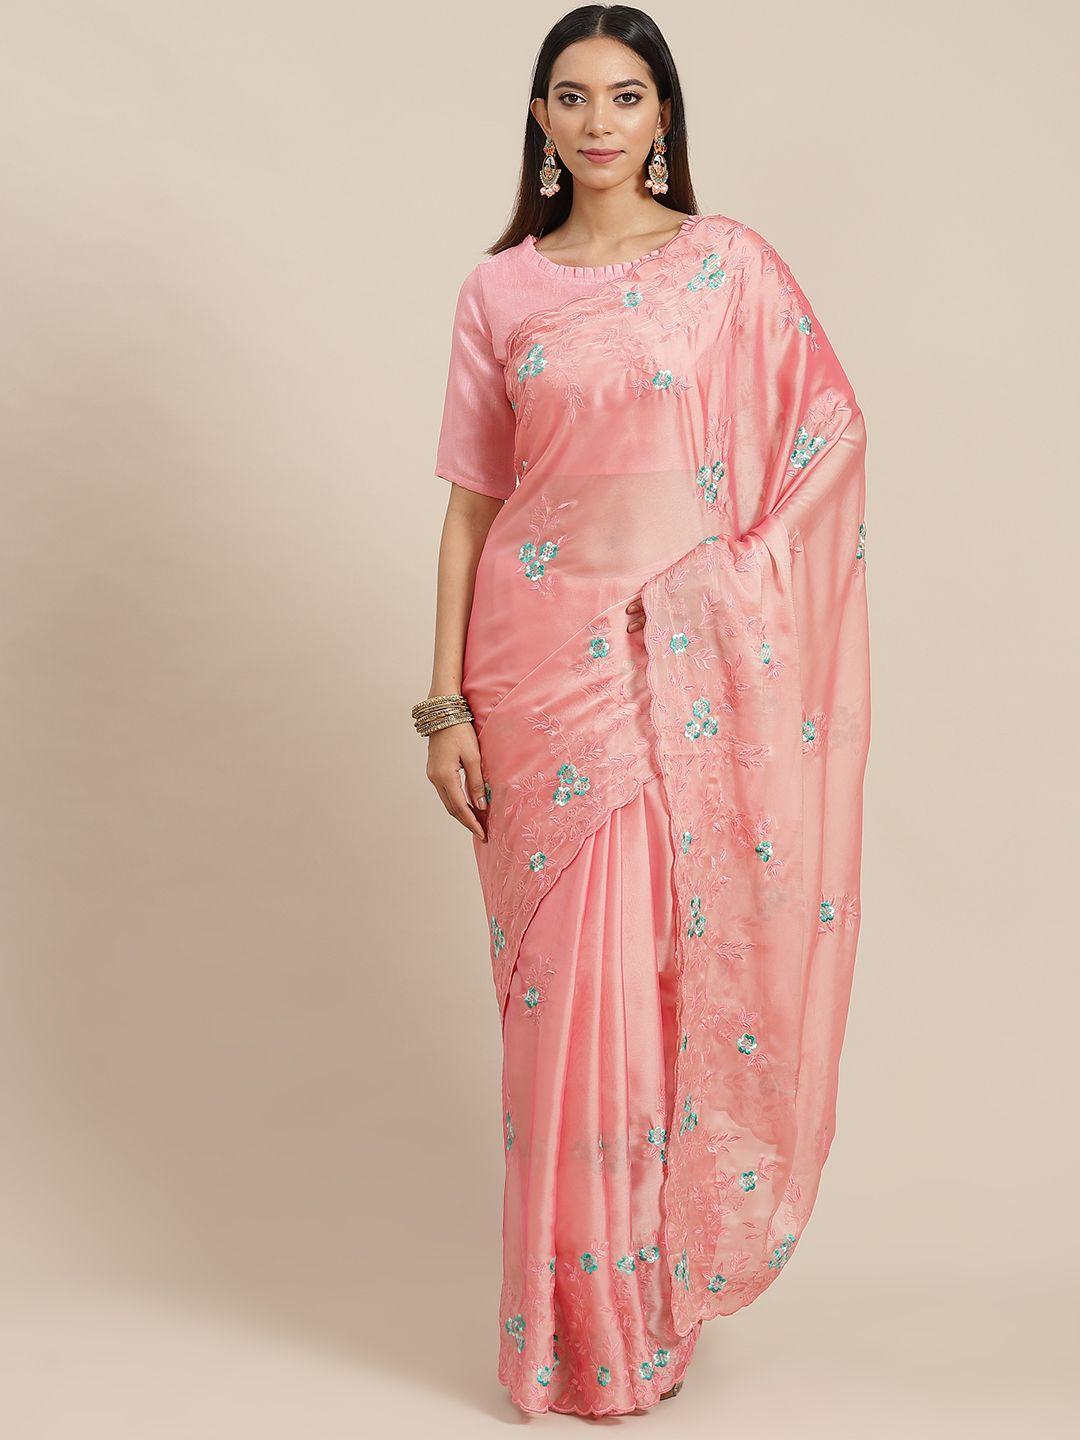 rajgranth pink floral embroidered georgette saree